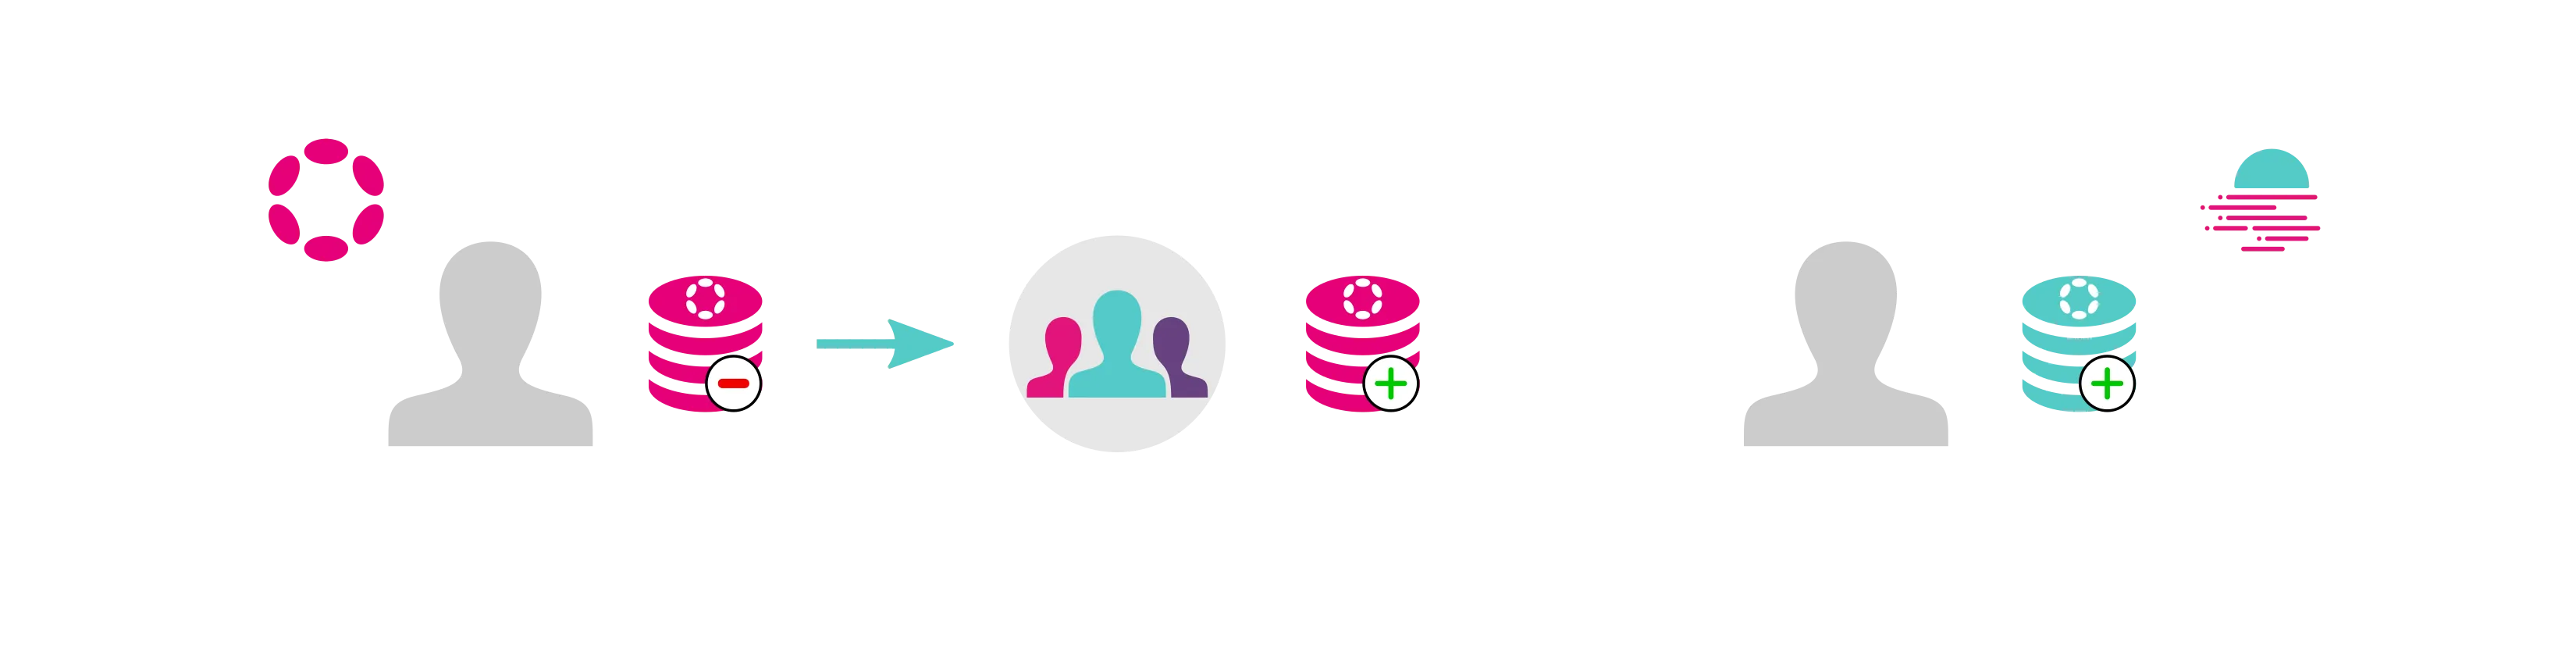 Transfers from the Relay Chain to Moonbeam